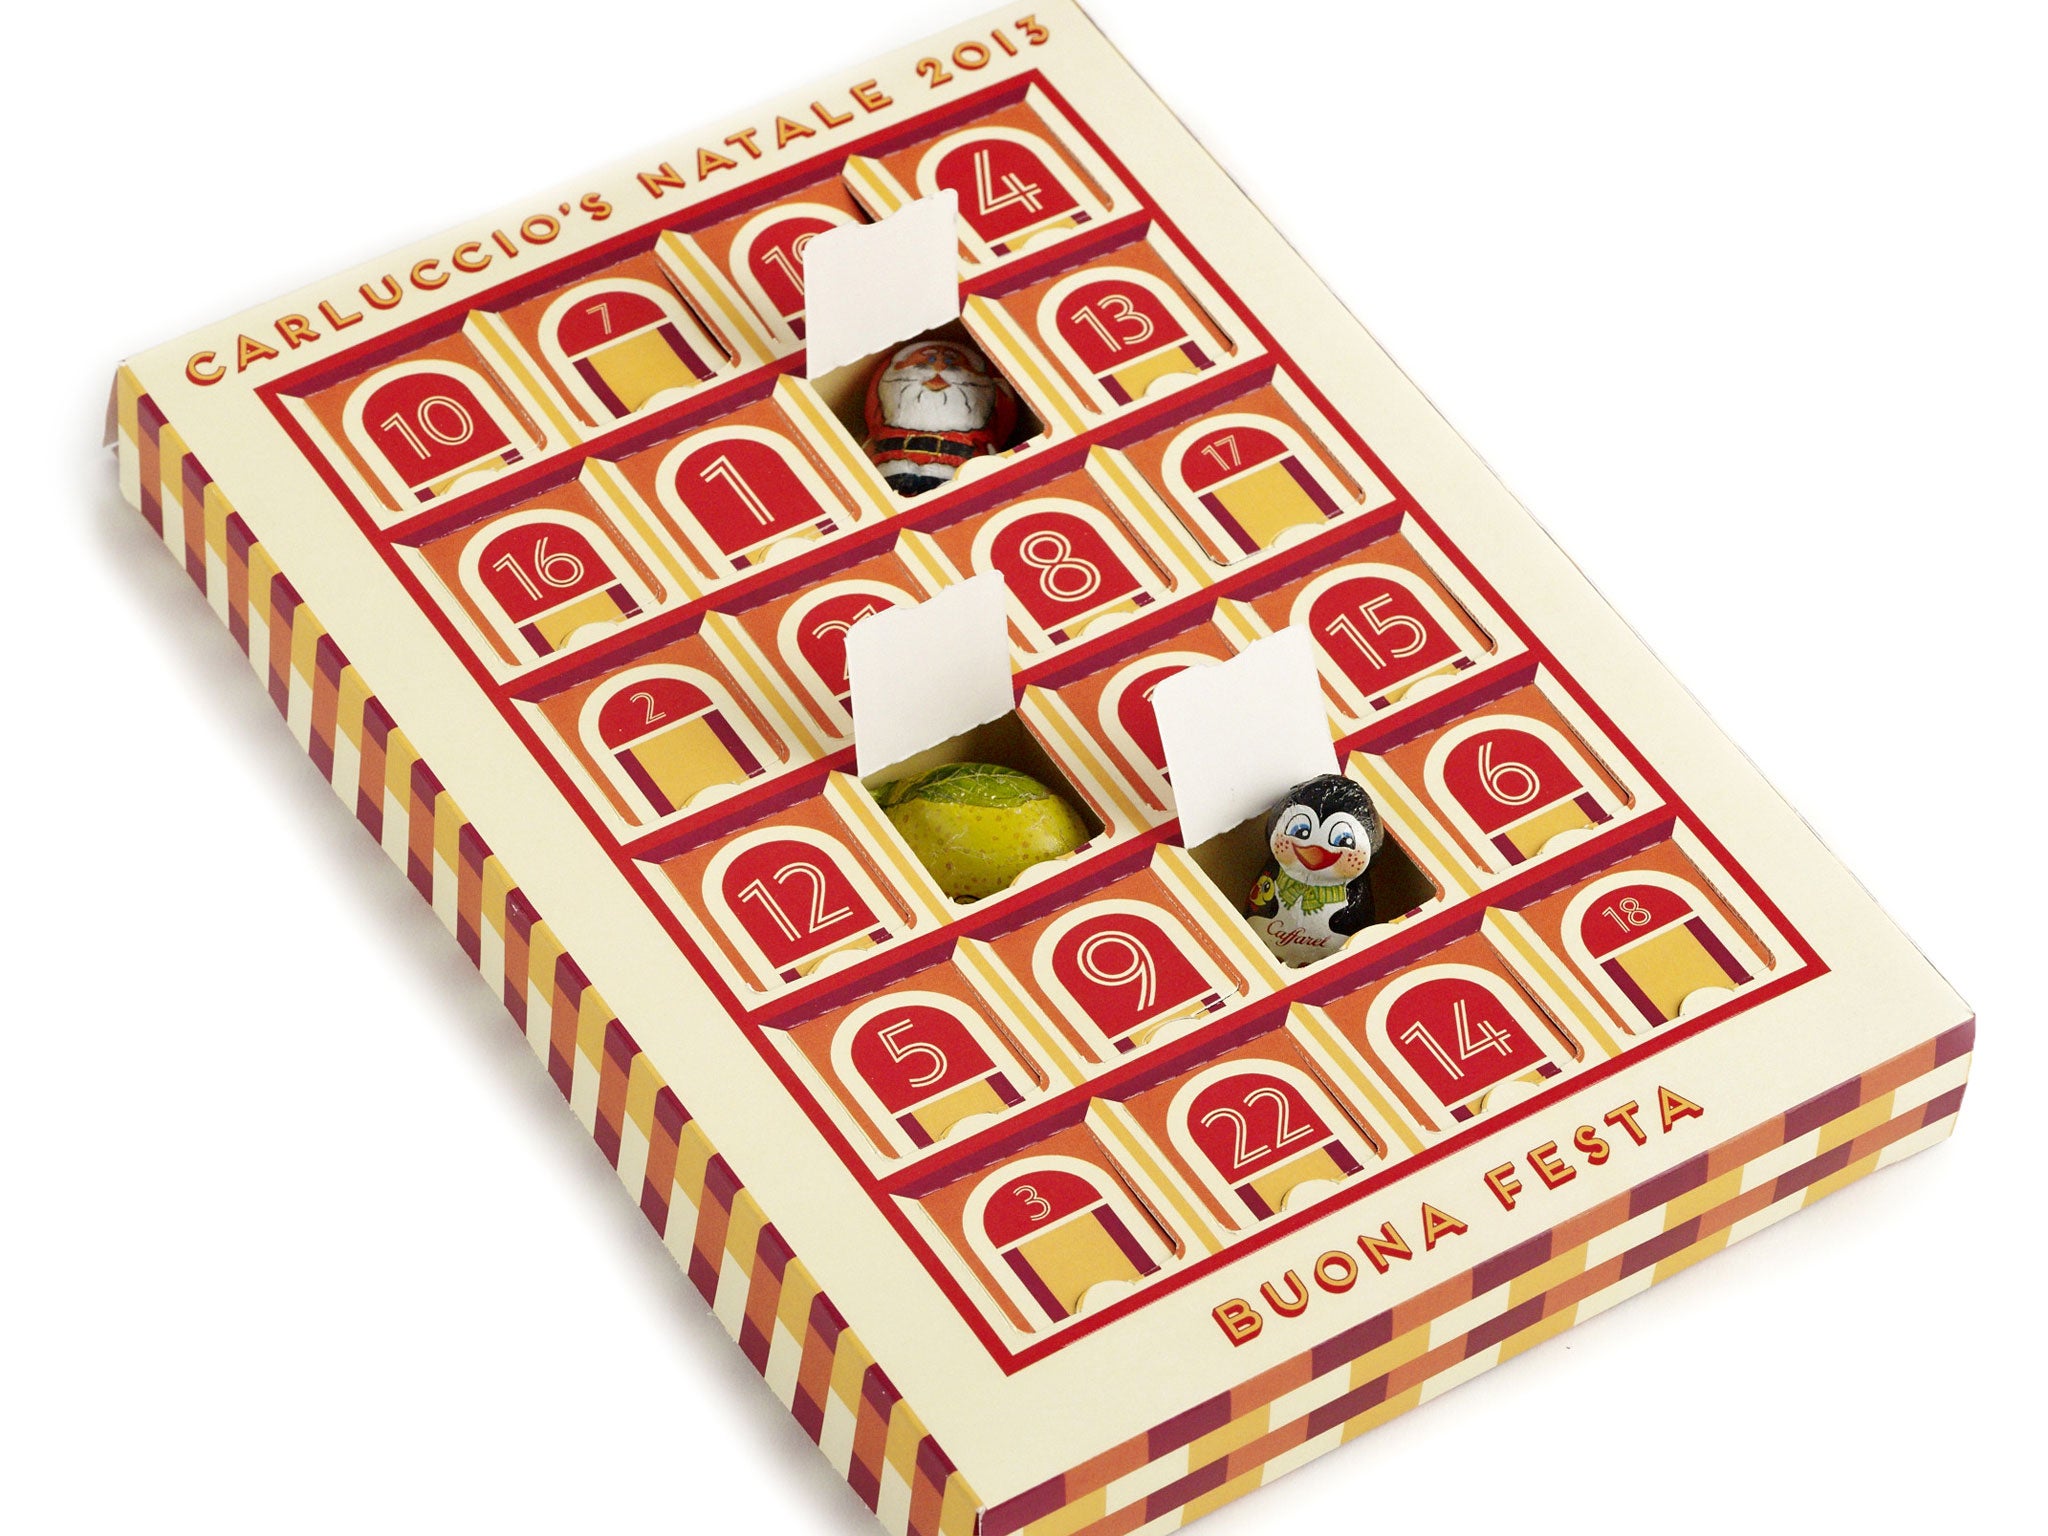 5. Carluccios Beuno Festa This is the first year Carluccio’s has produced an advent calendar and it was worth the wait. Besides the beautiful packaging, inspired by the colours of Bologna, each window reveals high-quality, foil wrapped chocolate in